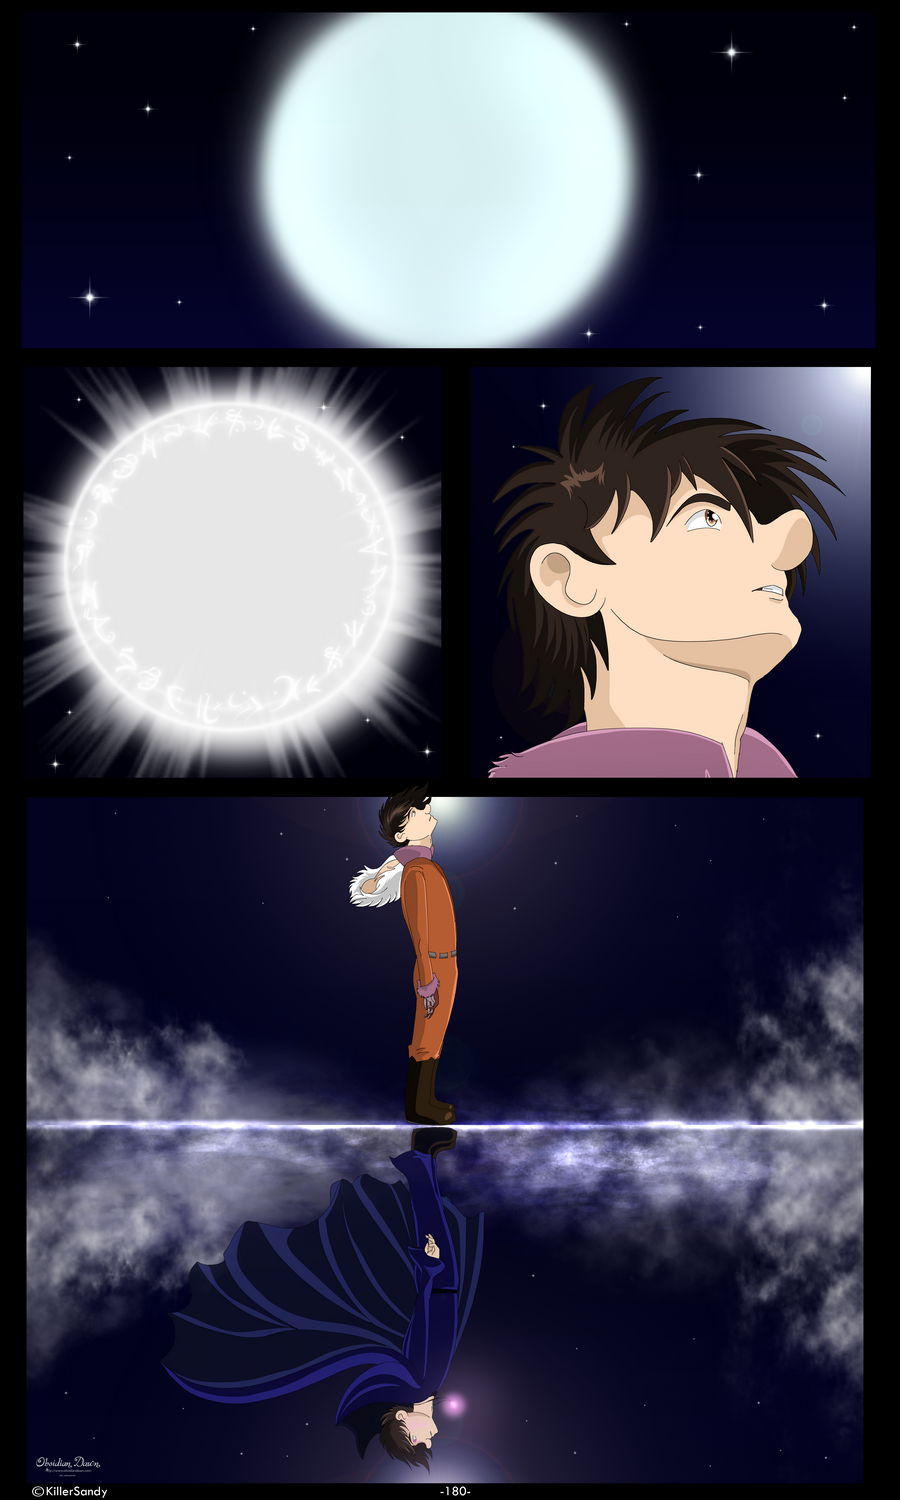 The Prince of the Moonlight Stone page 180